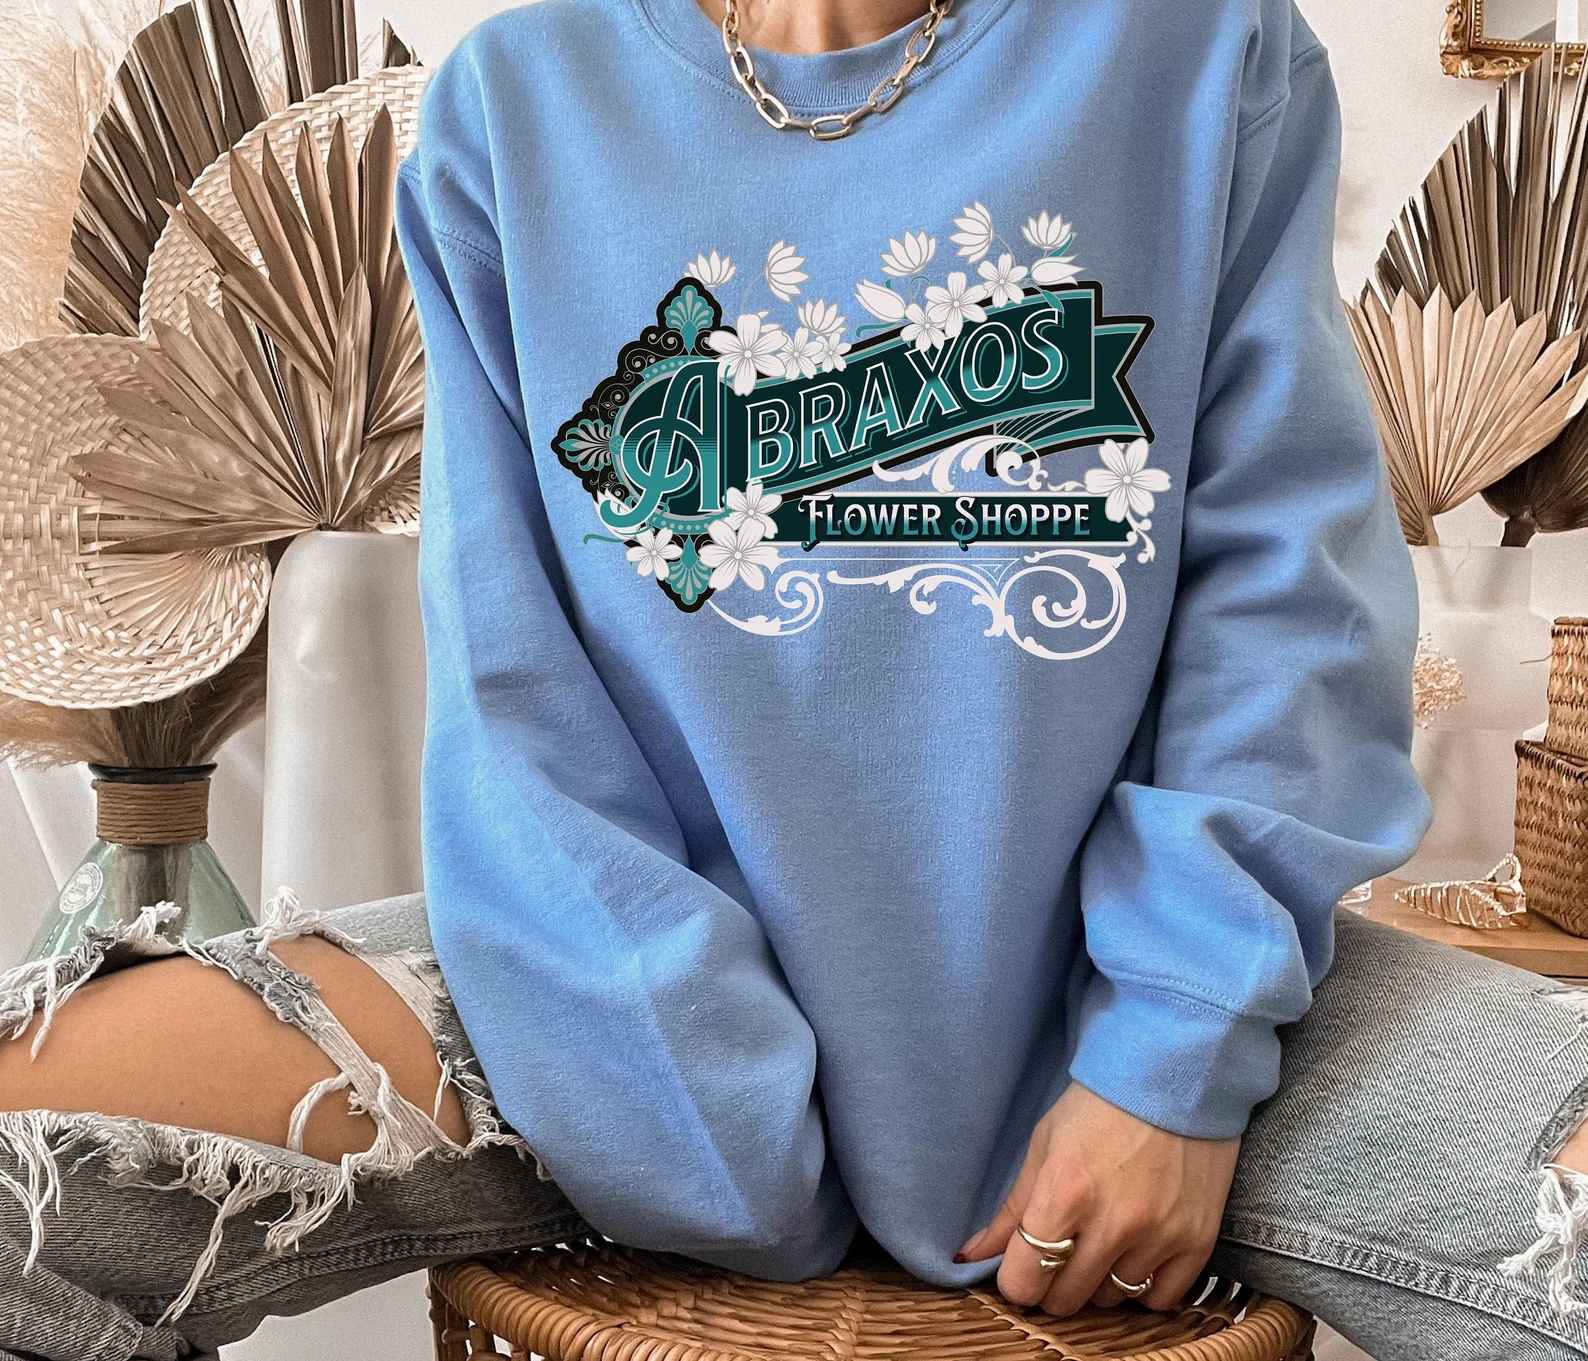 A photo of a person sitting on a stool wearing a blue sweatshirt with the words Abraxos Flower Shoppe written on it. 